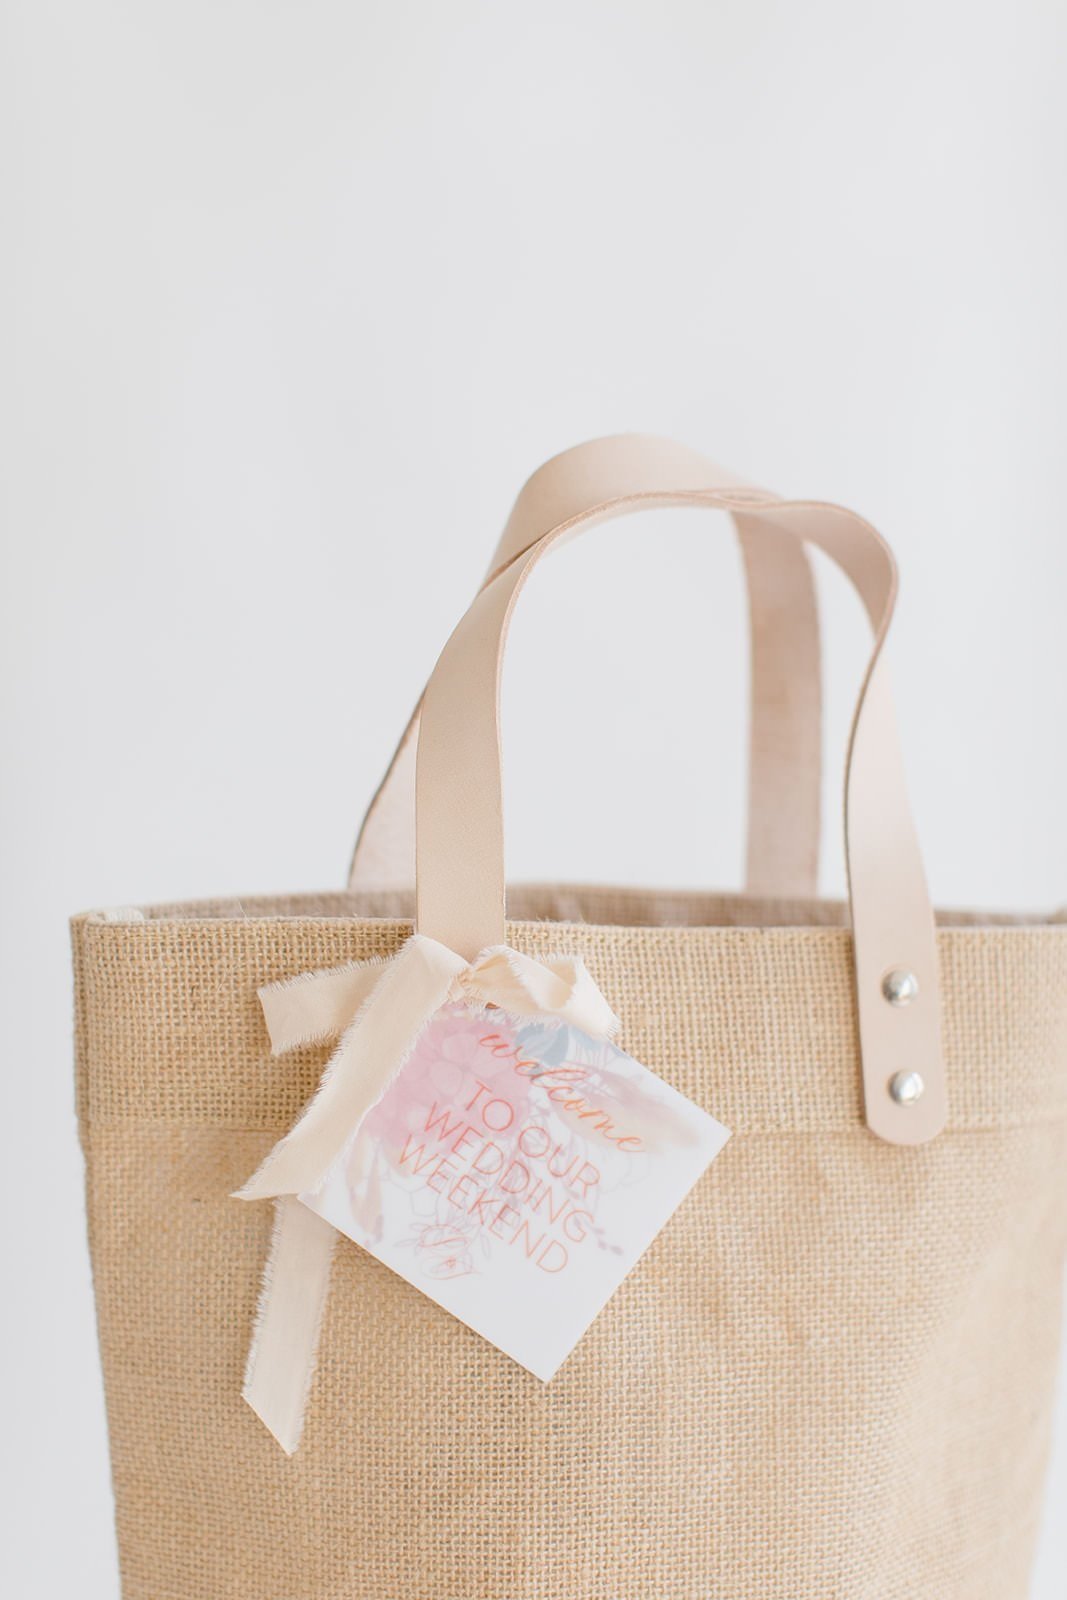 detail of custom market tote style wedding welcome gift